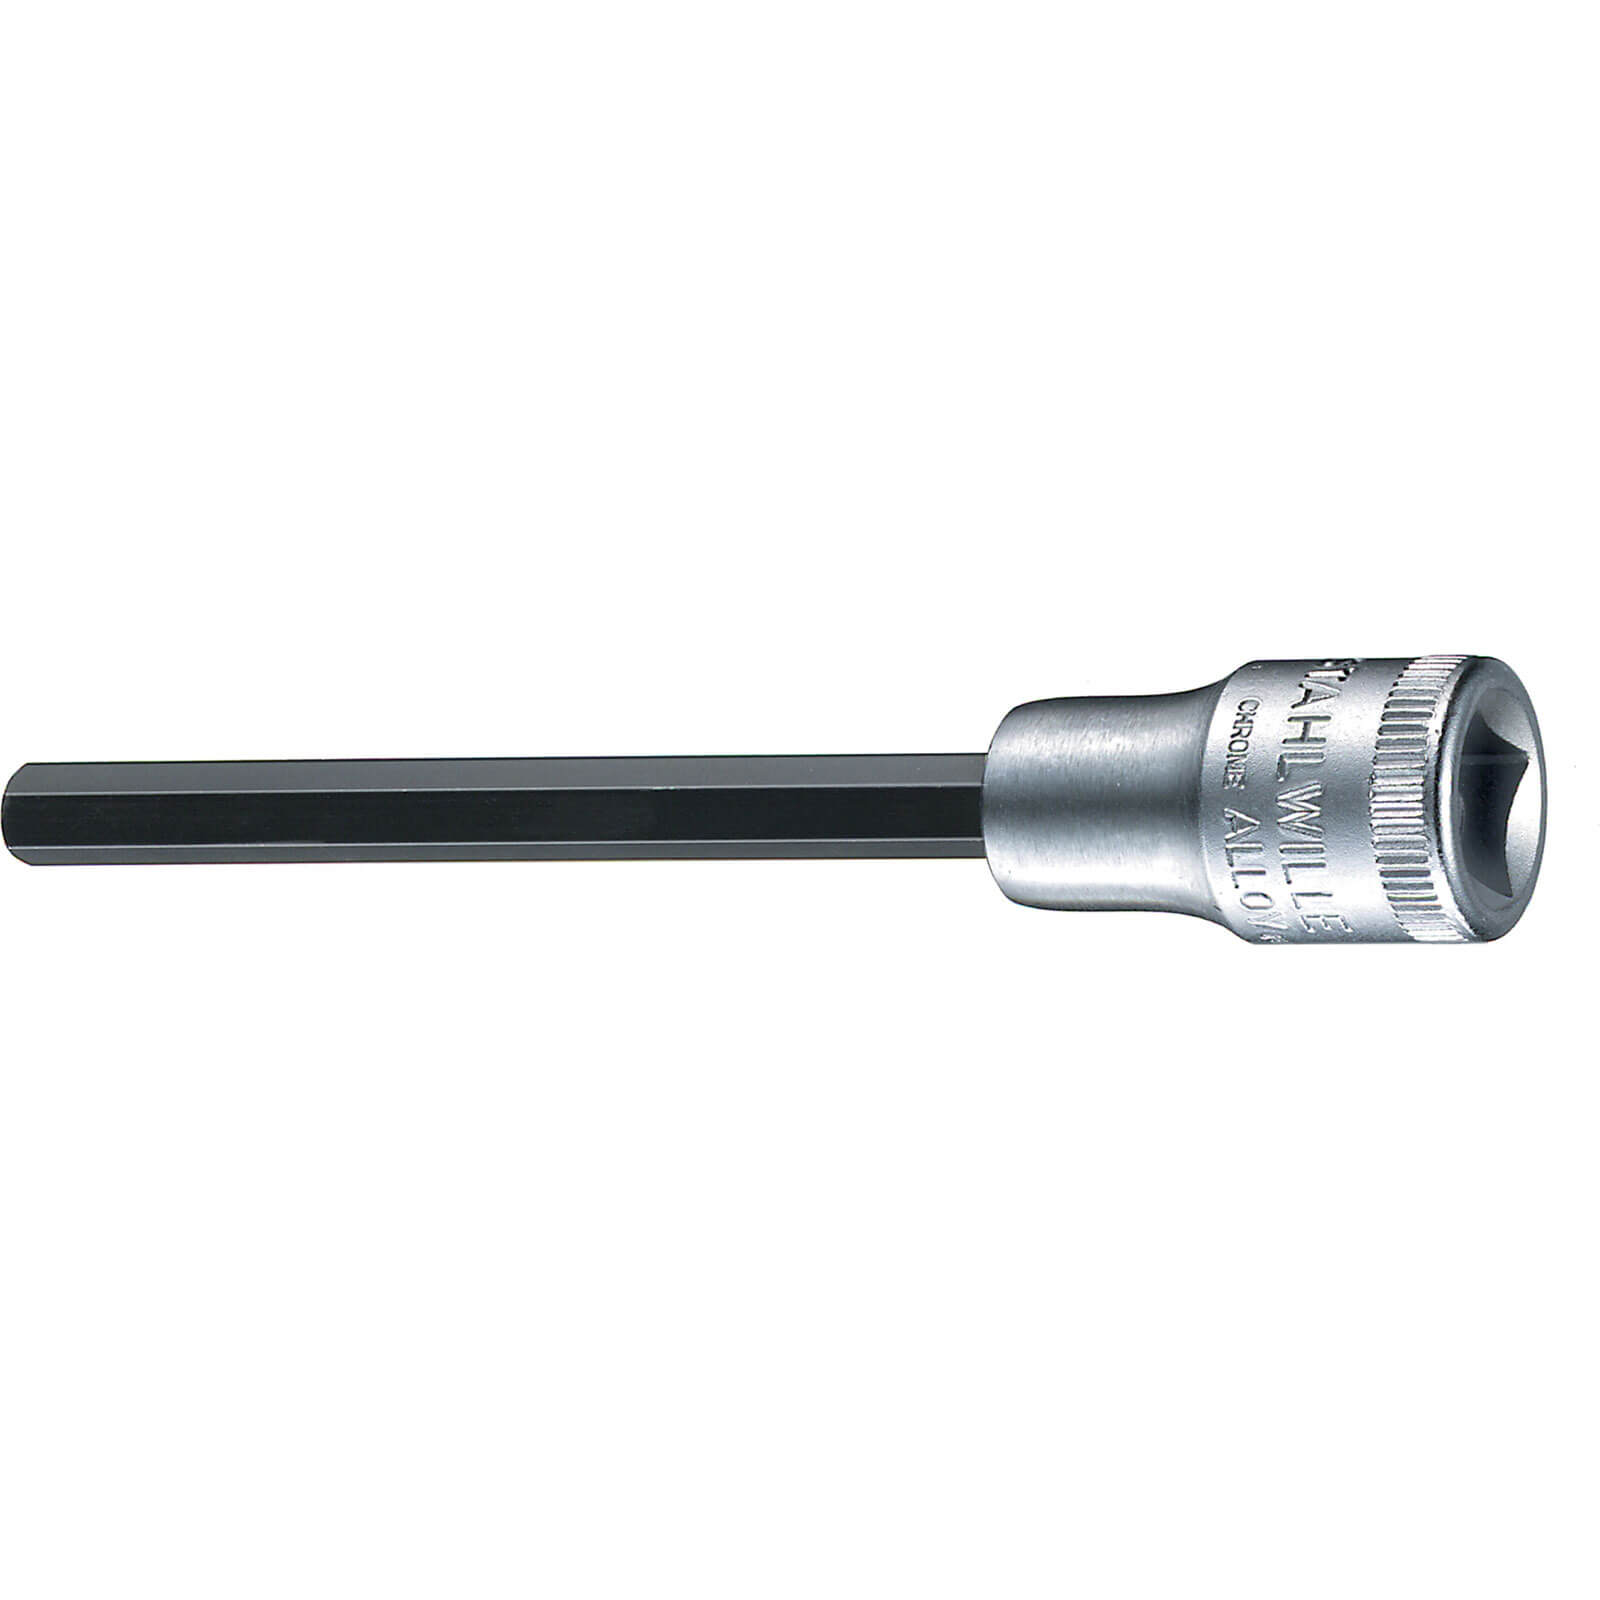 Image of Stahlwille 3/8" Drive Extra Long Hexagon Socket Bit 3/8" 8mm